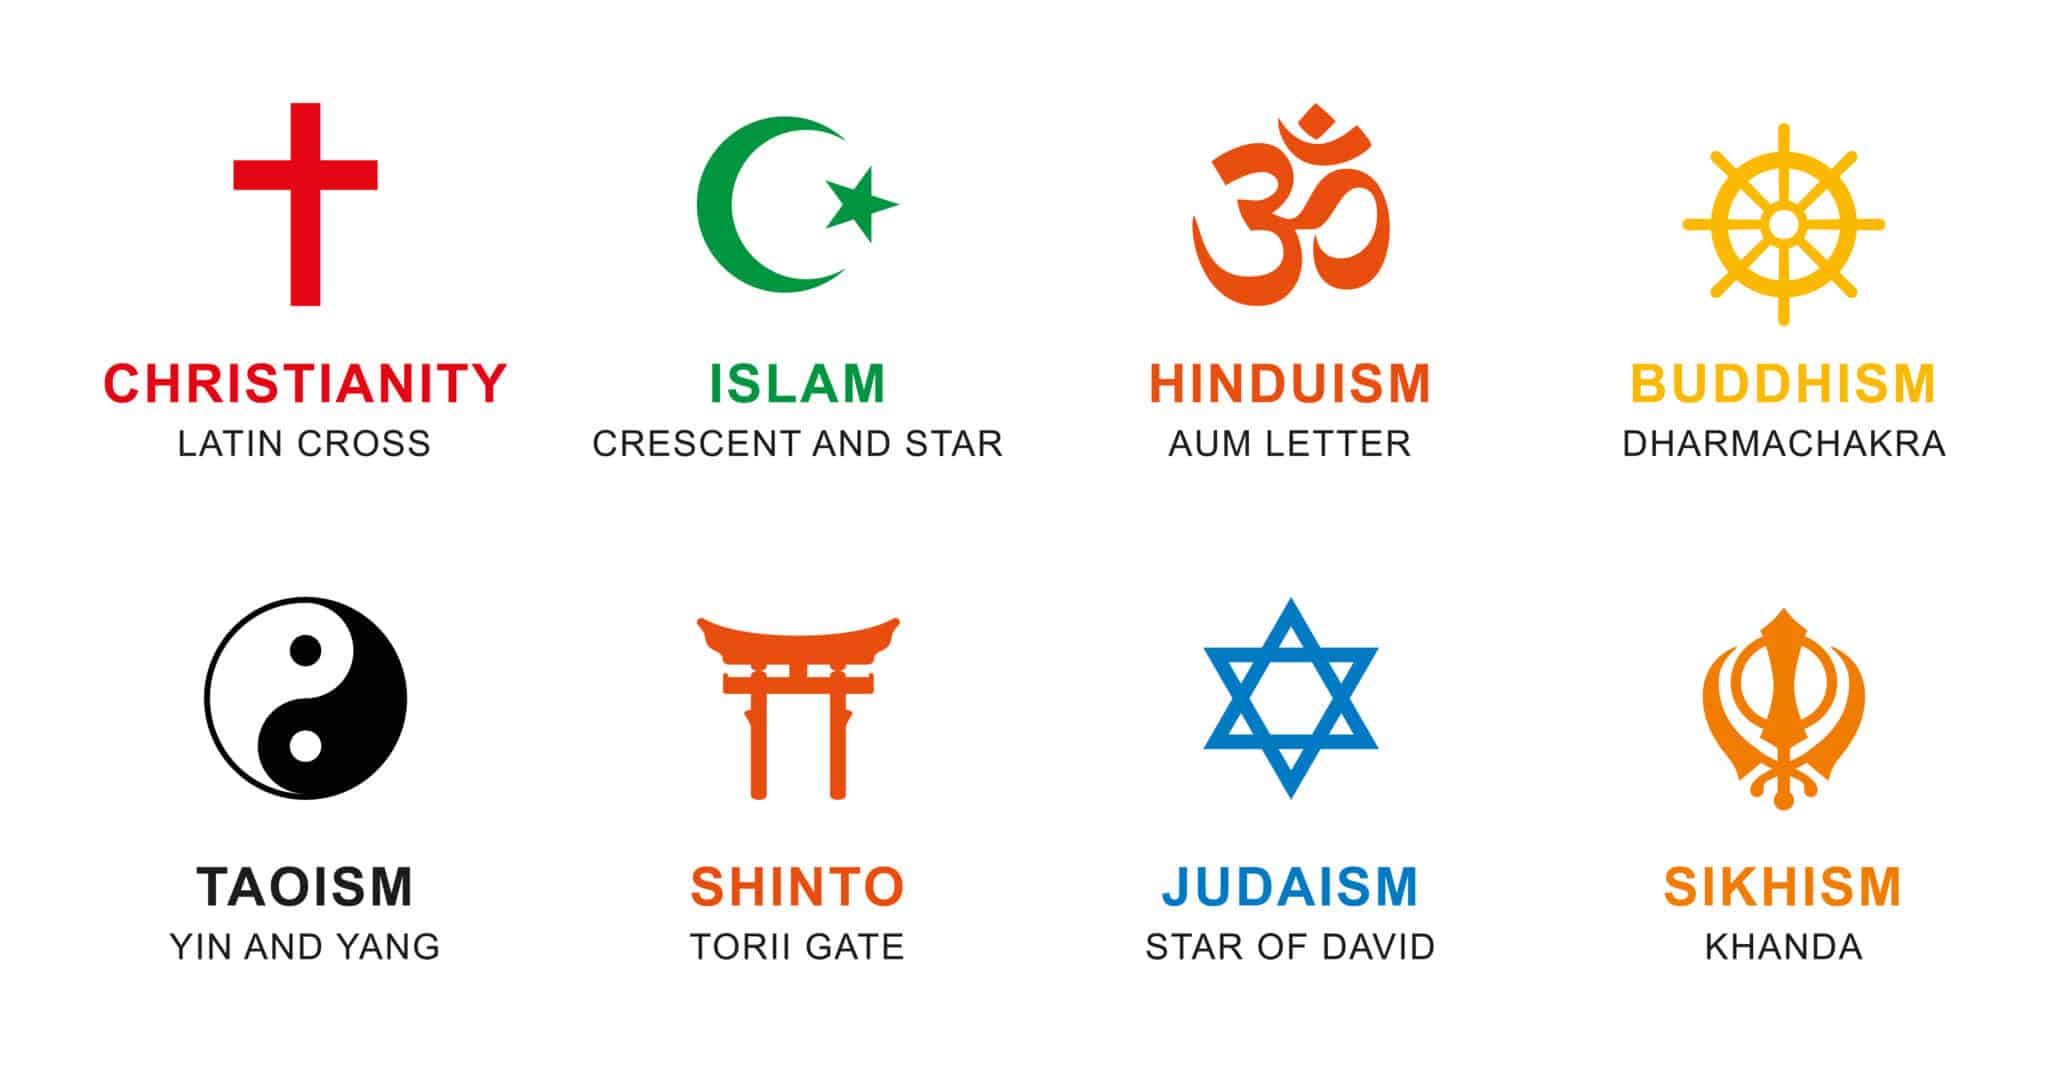 World religion symbols with labels, showcasing Athreon's transcription services for diverse faiths.